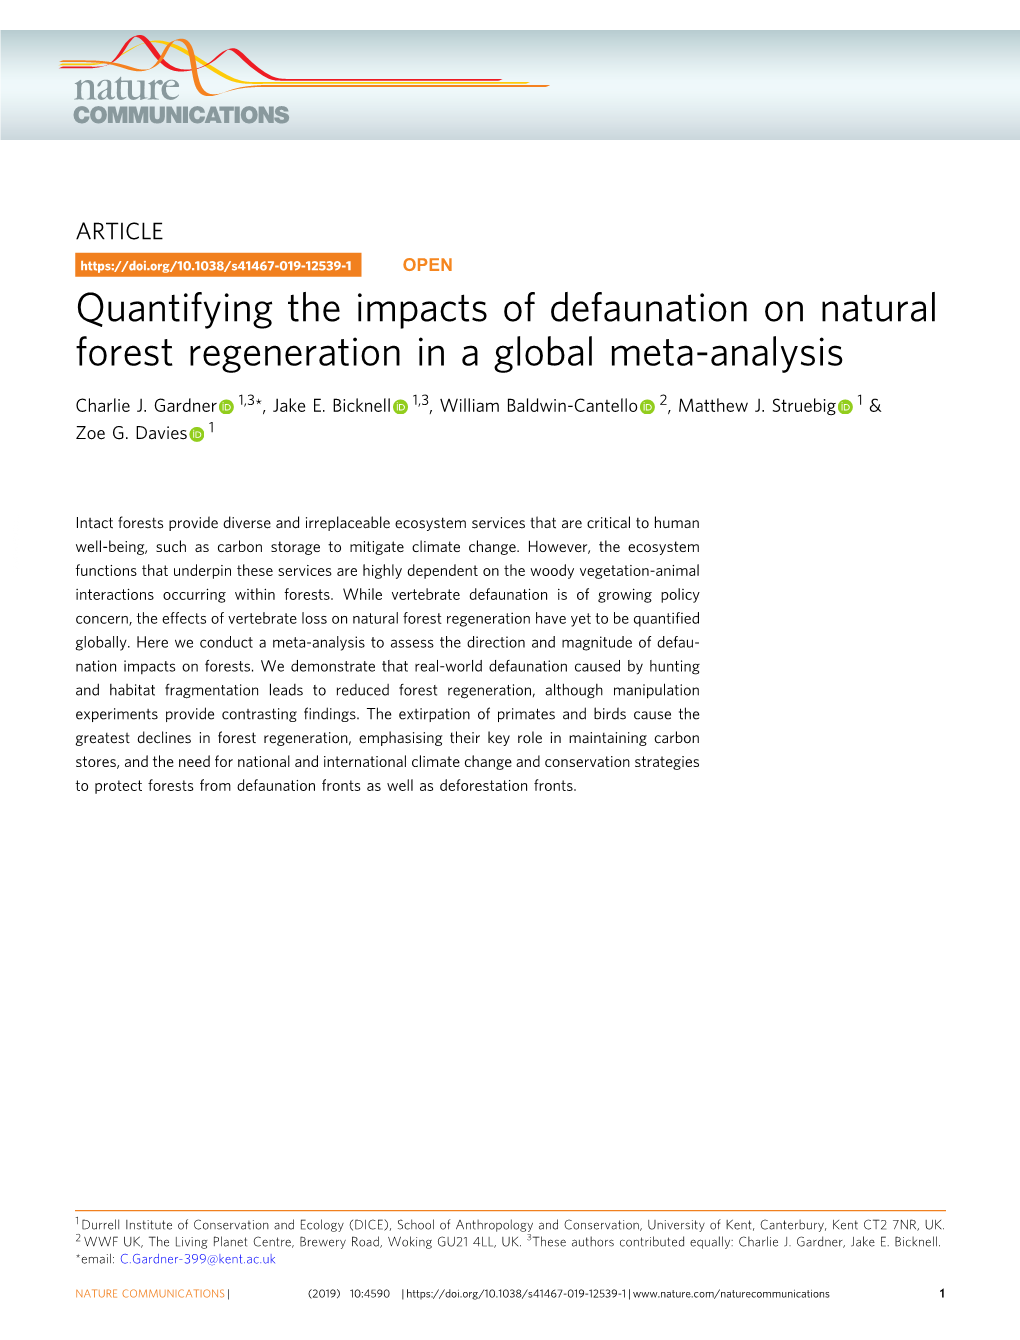 Quantifying the Impacts of Defaunation on Natural Forest Regeneration in a Global Meta-Analysis